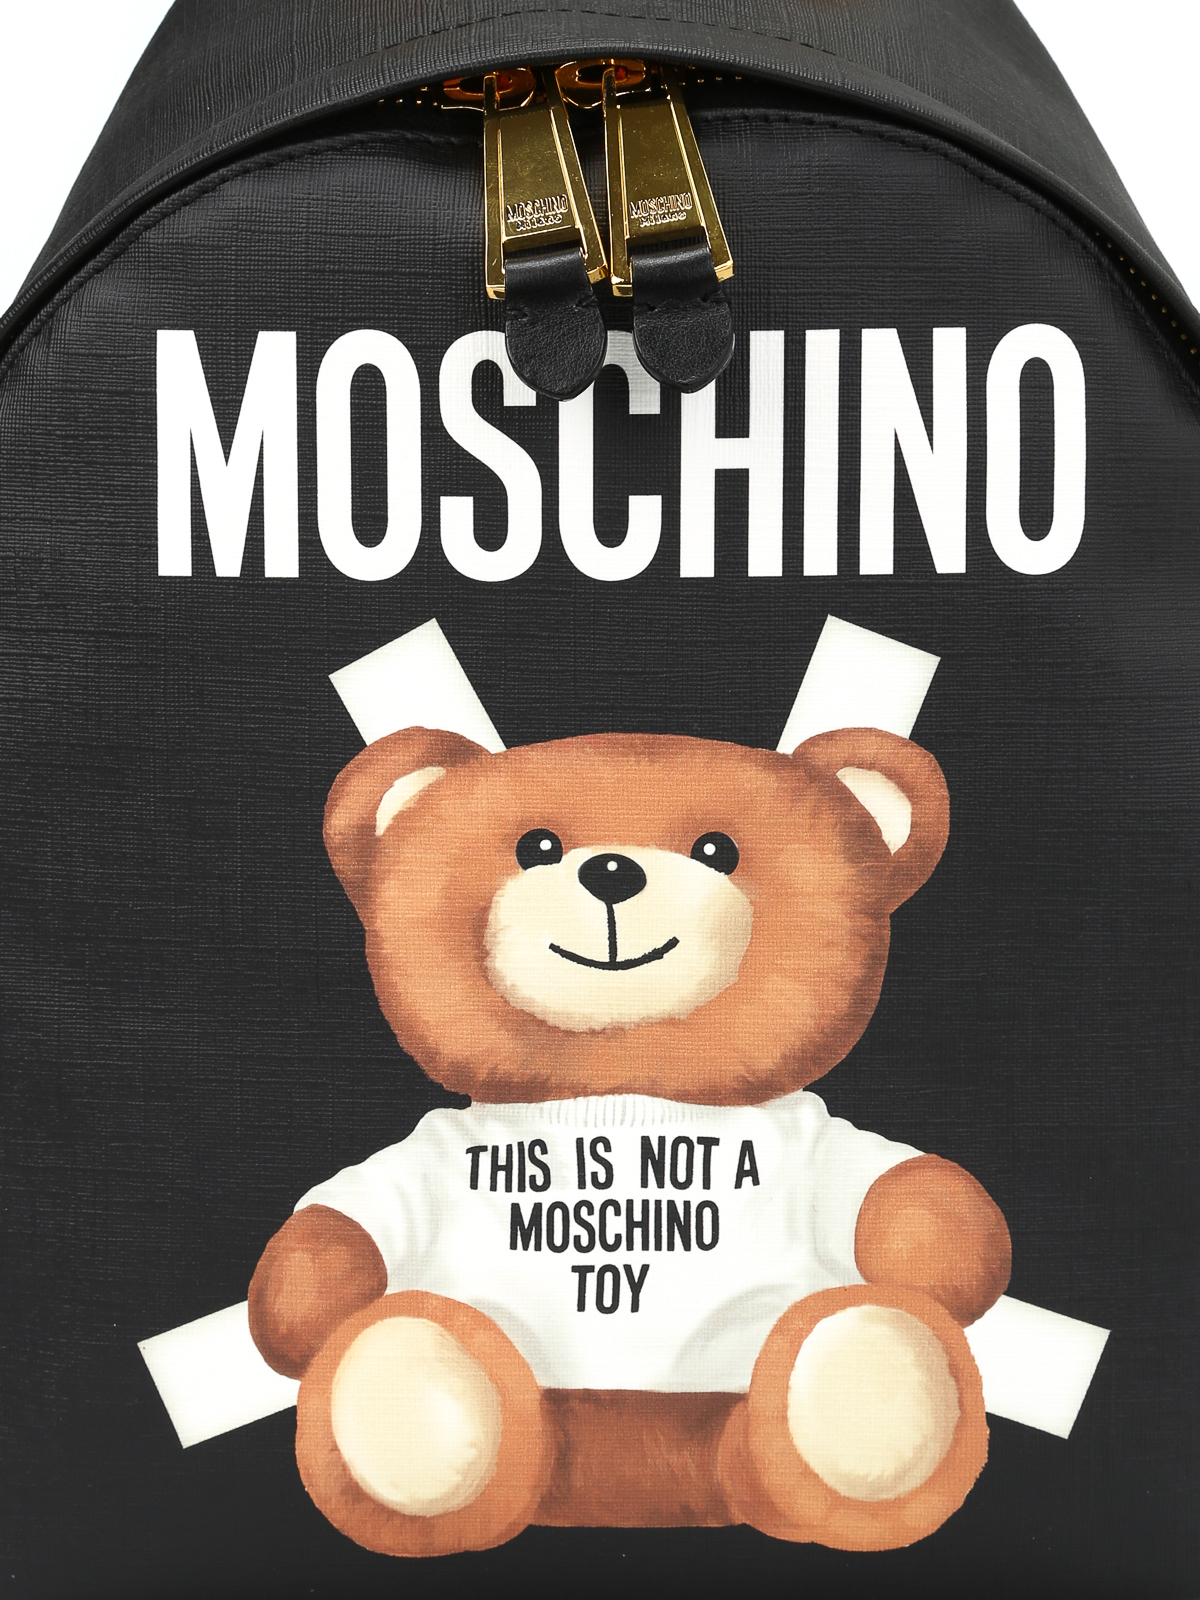 this is not a moschino toy bag